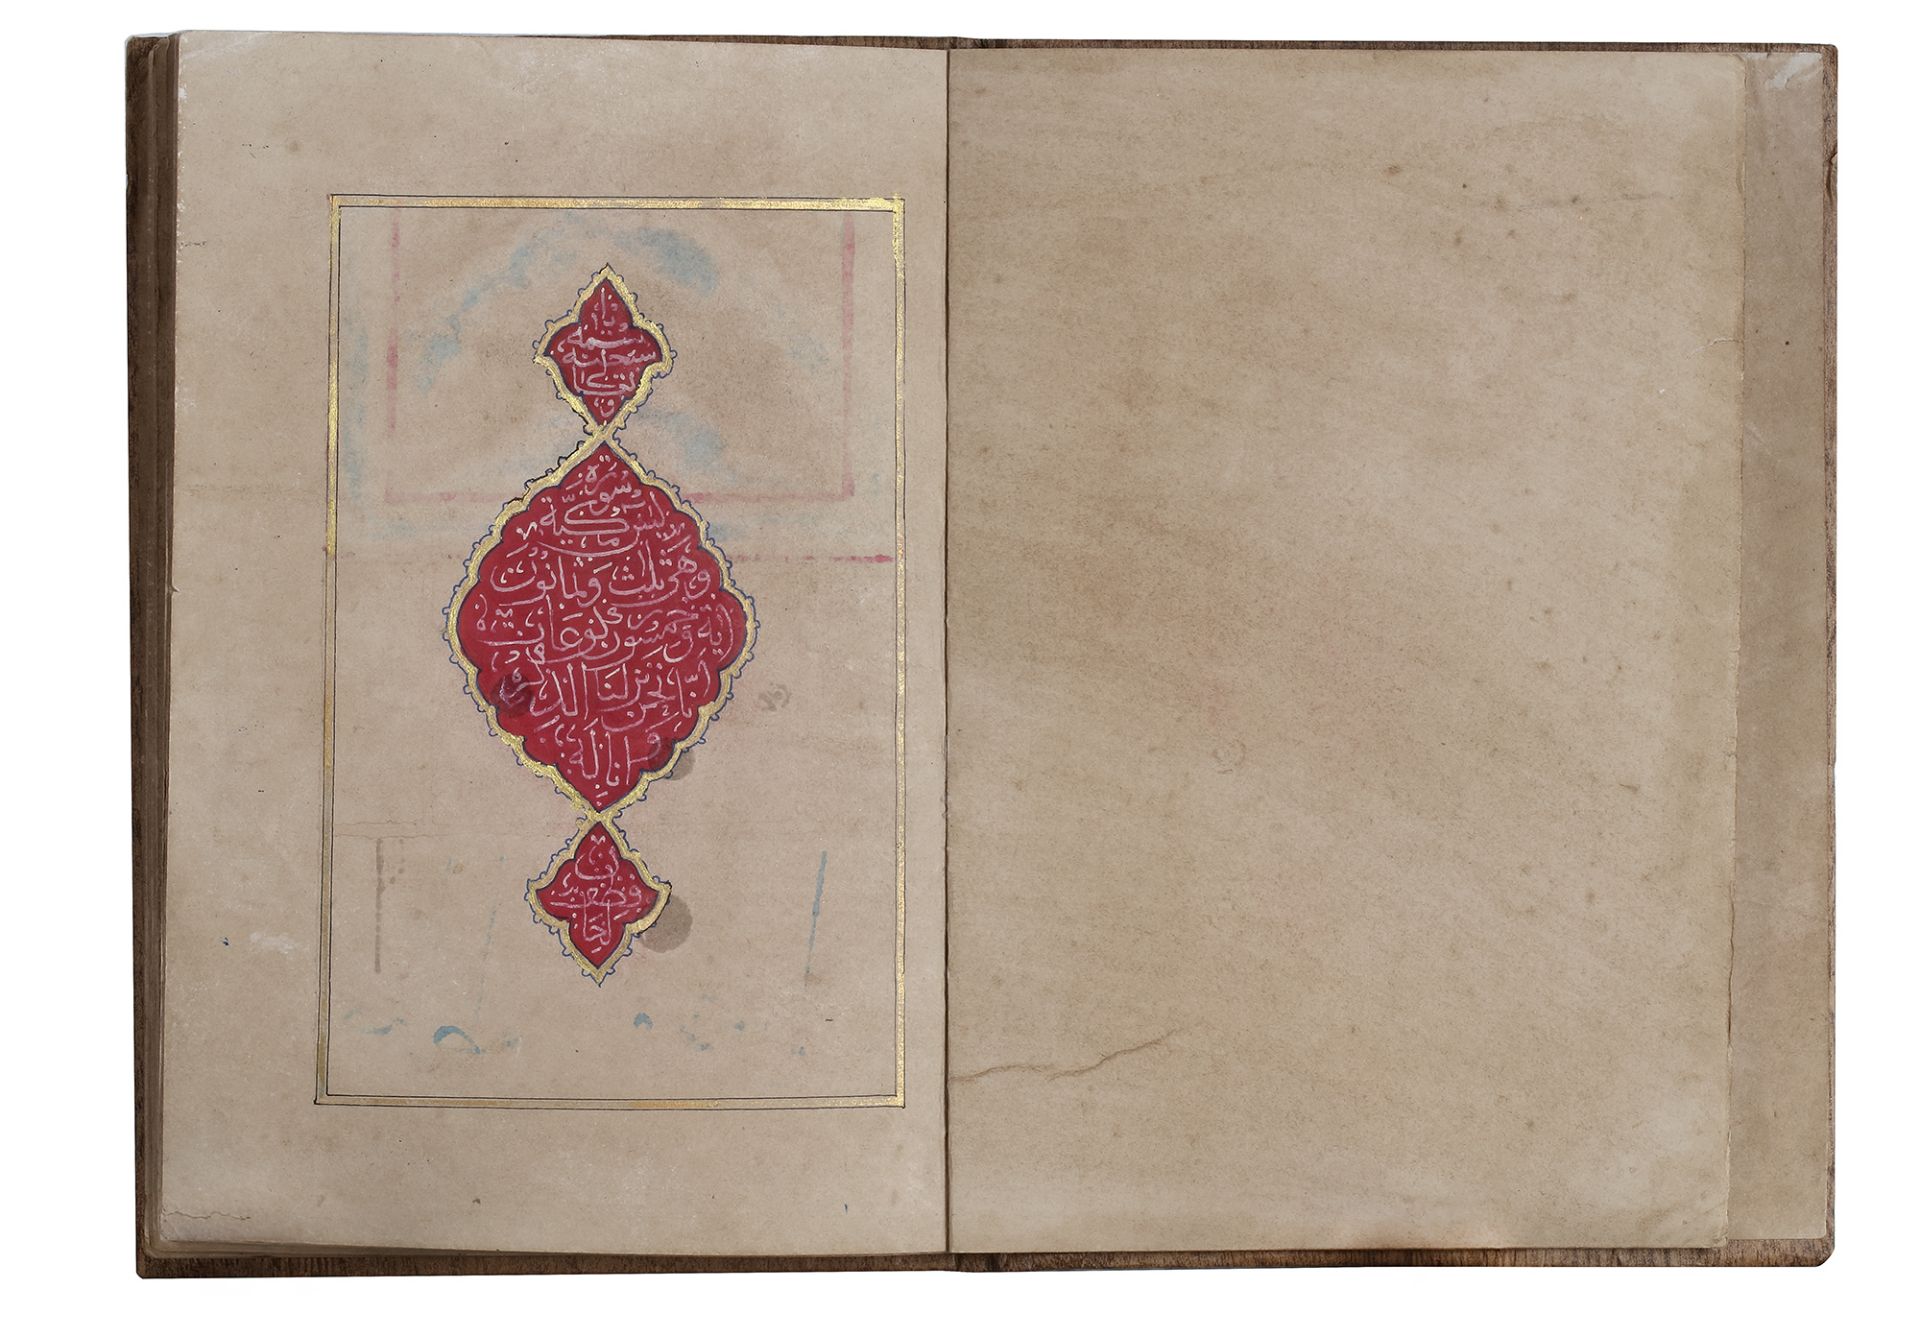 A QURAN SECTION WRITTEN BY MEHMET SELIM VASFI, OTTOMAN TURKEY, DATED 1303 AH/1885 AD - Image 4 of 4